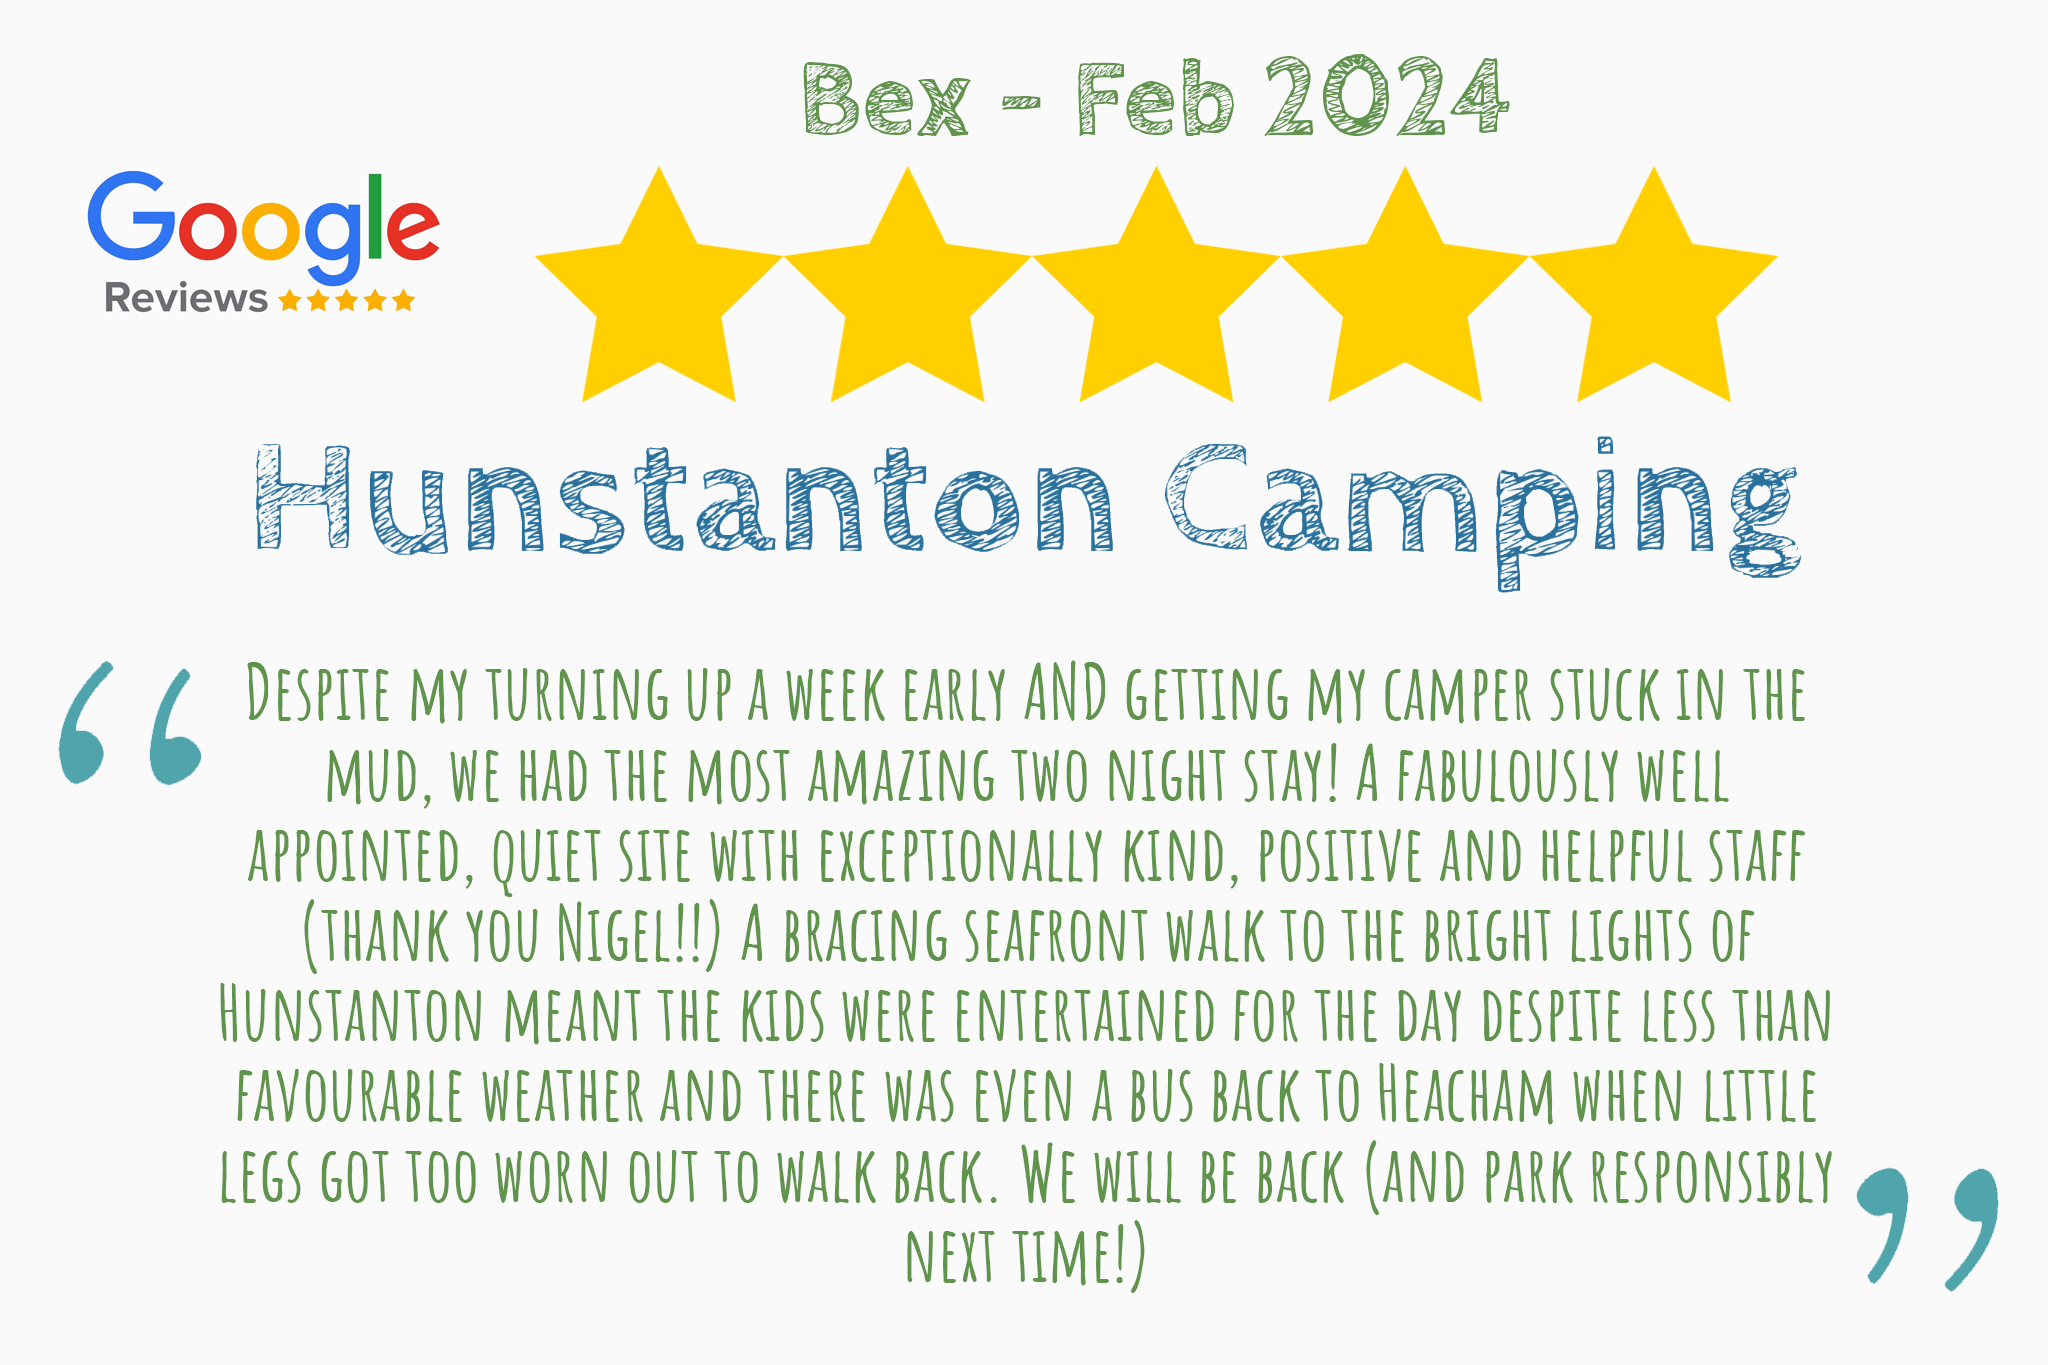 Five star review from Bex on Google Reviews that says "Despite my turning up a week early AND getting my camper stuck in the mud, we had the most amazing two night stay! A fabulously well appointed, quiet site with exceptionally kind, positive and helpful staff (thank you Nigel!!) A bracing seafront walk to the bright lights of Hunstanton meant the kids were entertained for the day despite less than favourable weather and there was even a bus back to Heacham when little legs got too worn out to walk back. We will be back (and park responsibly next time!)"